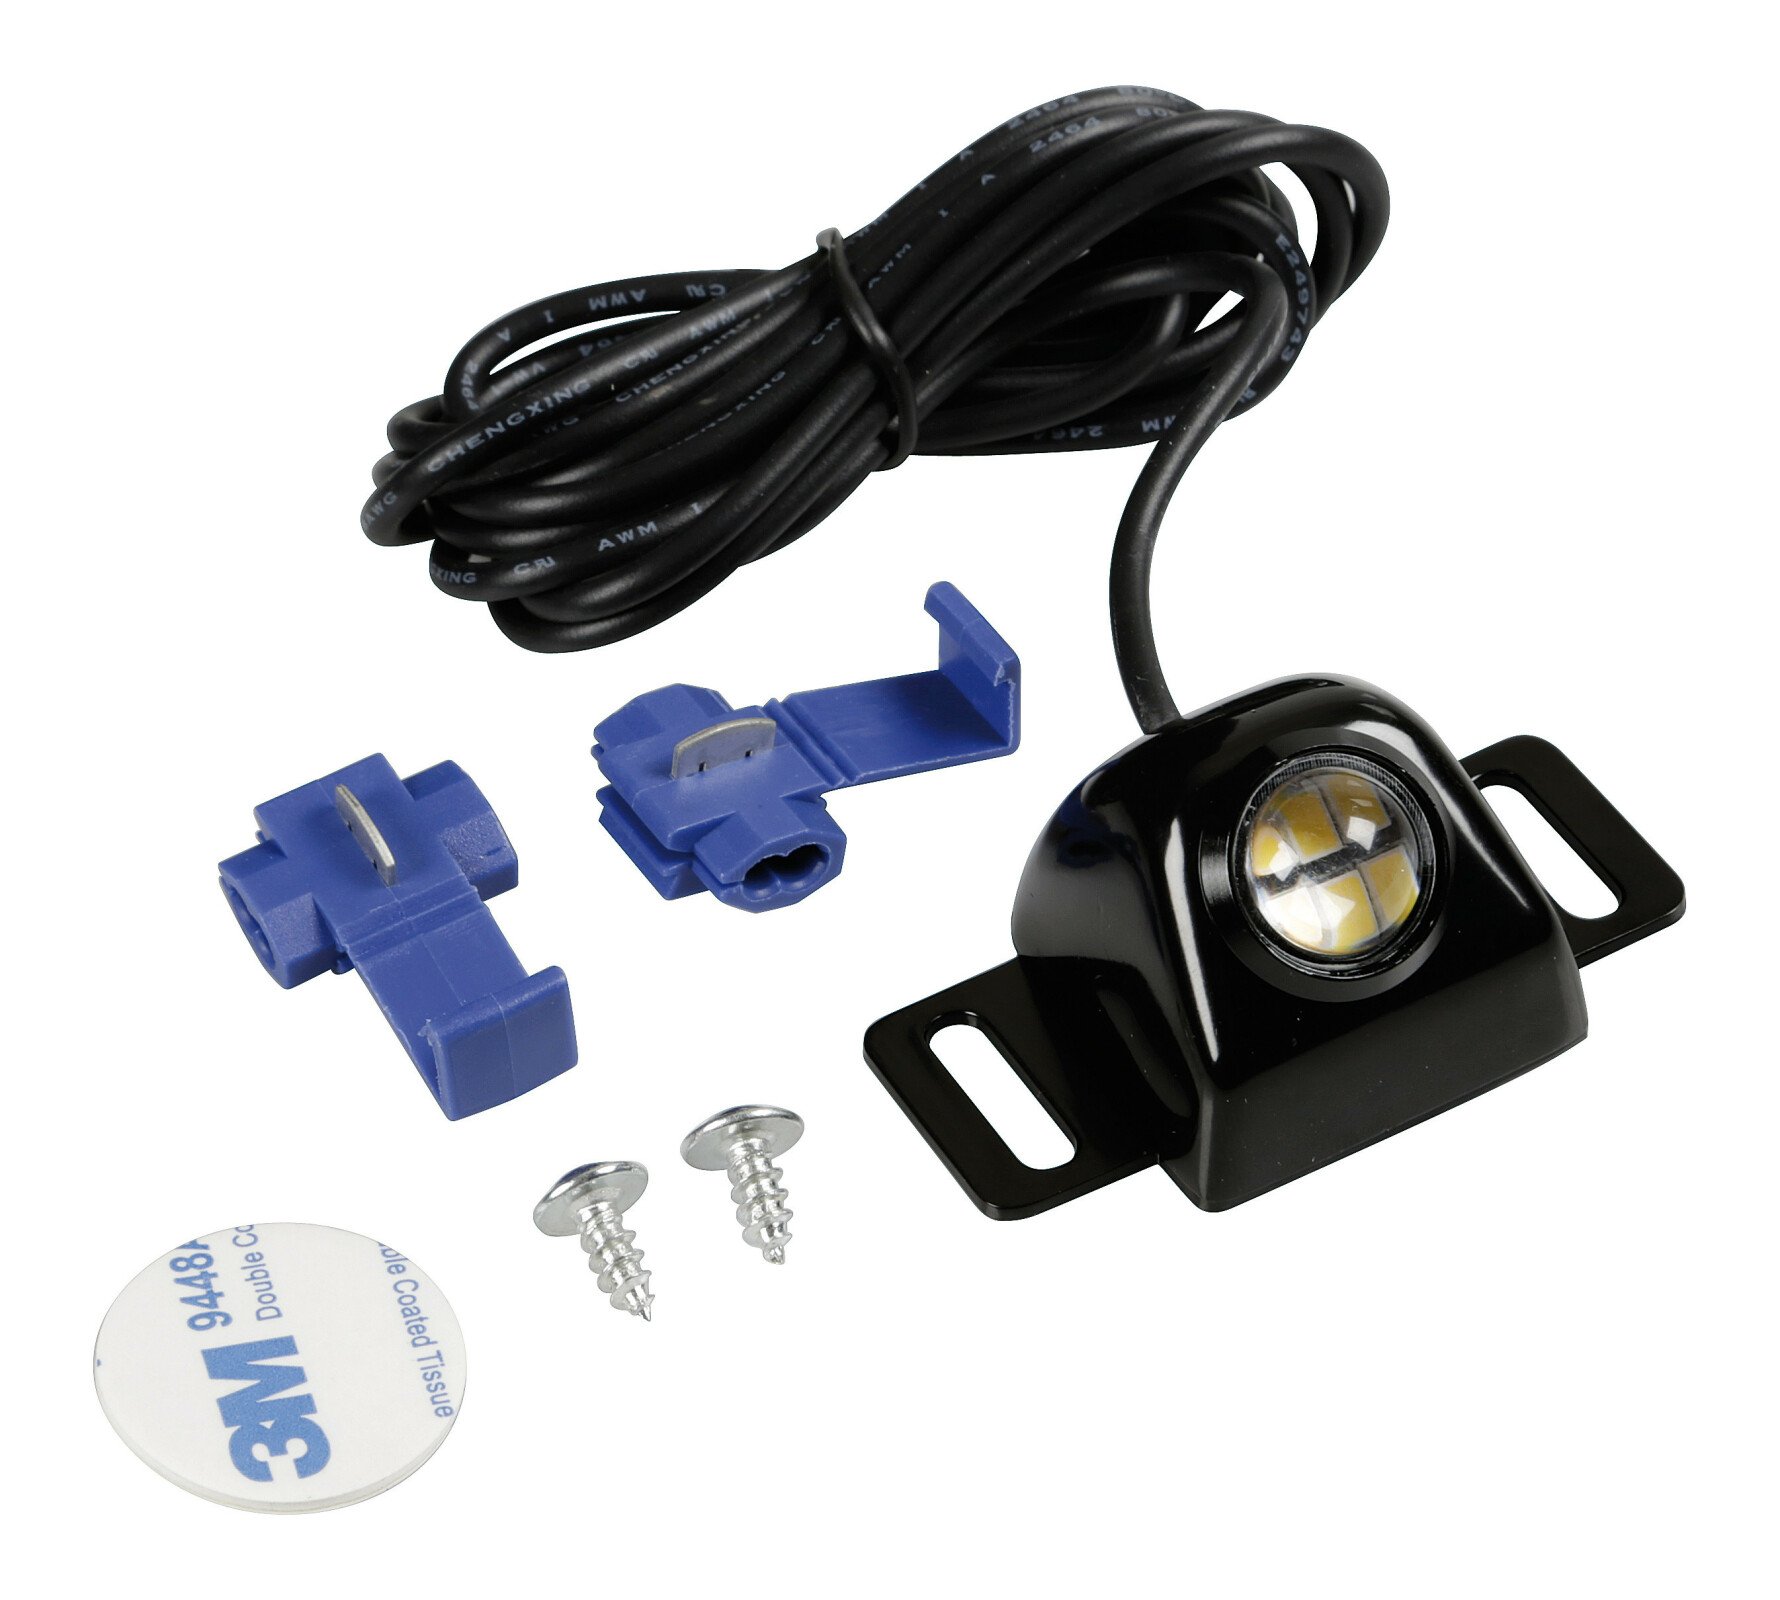 Proiector mers inapoi cu LED multifunctional - 12/30V thumb